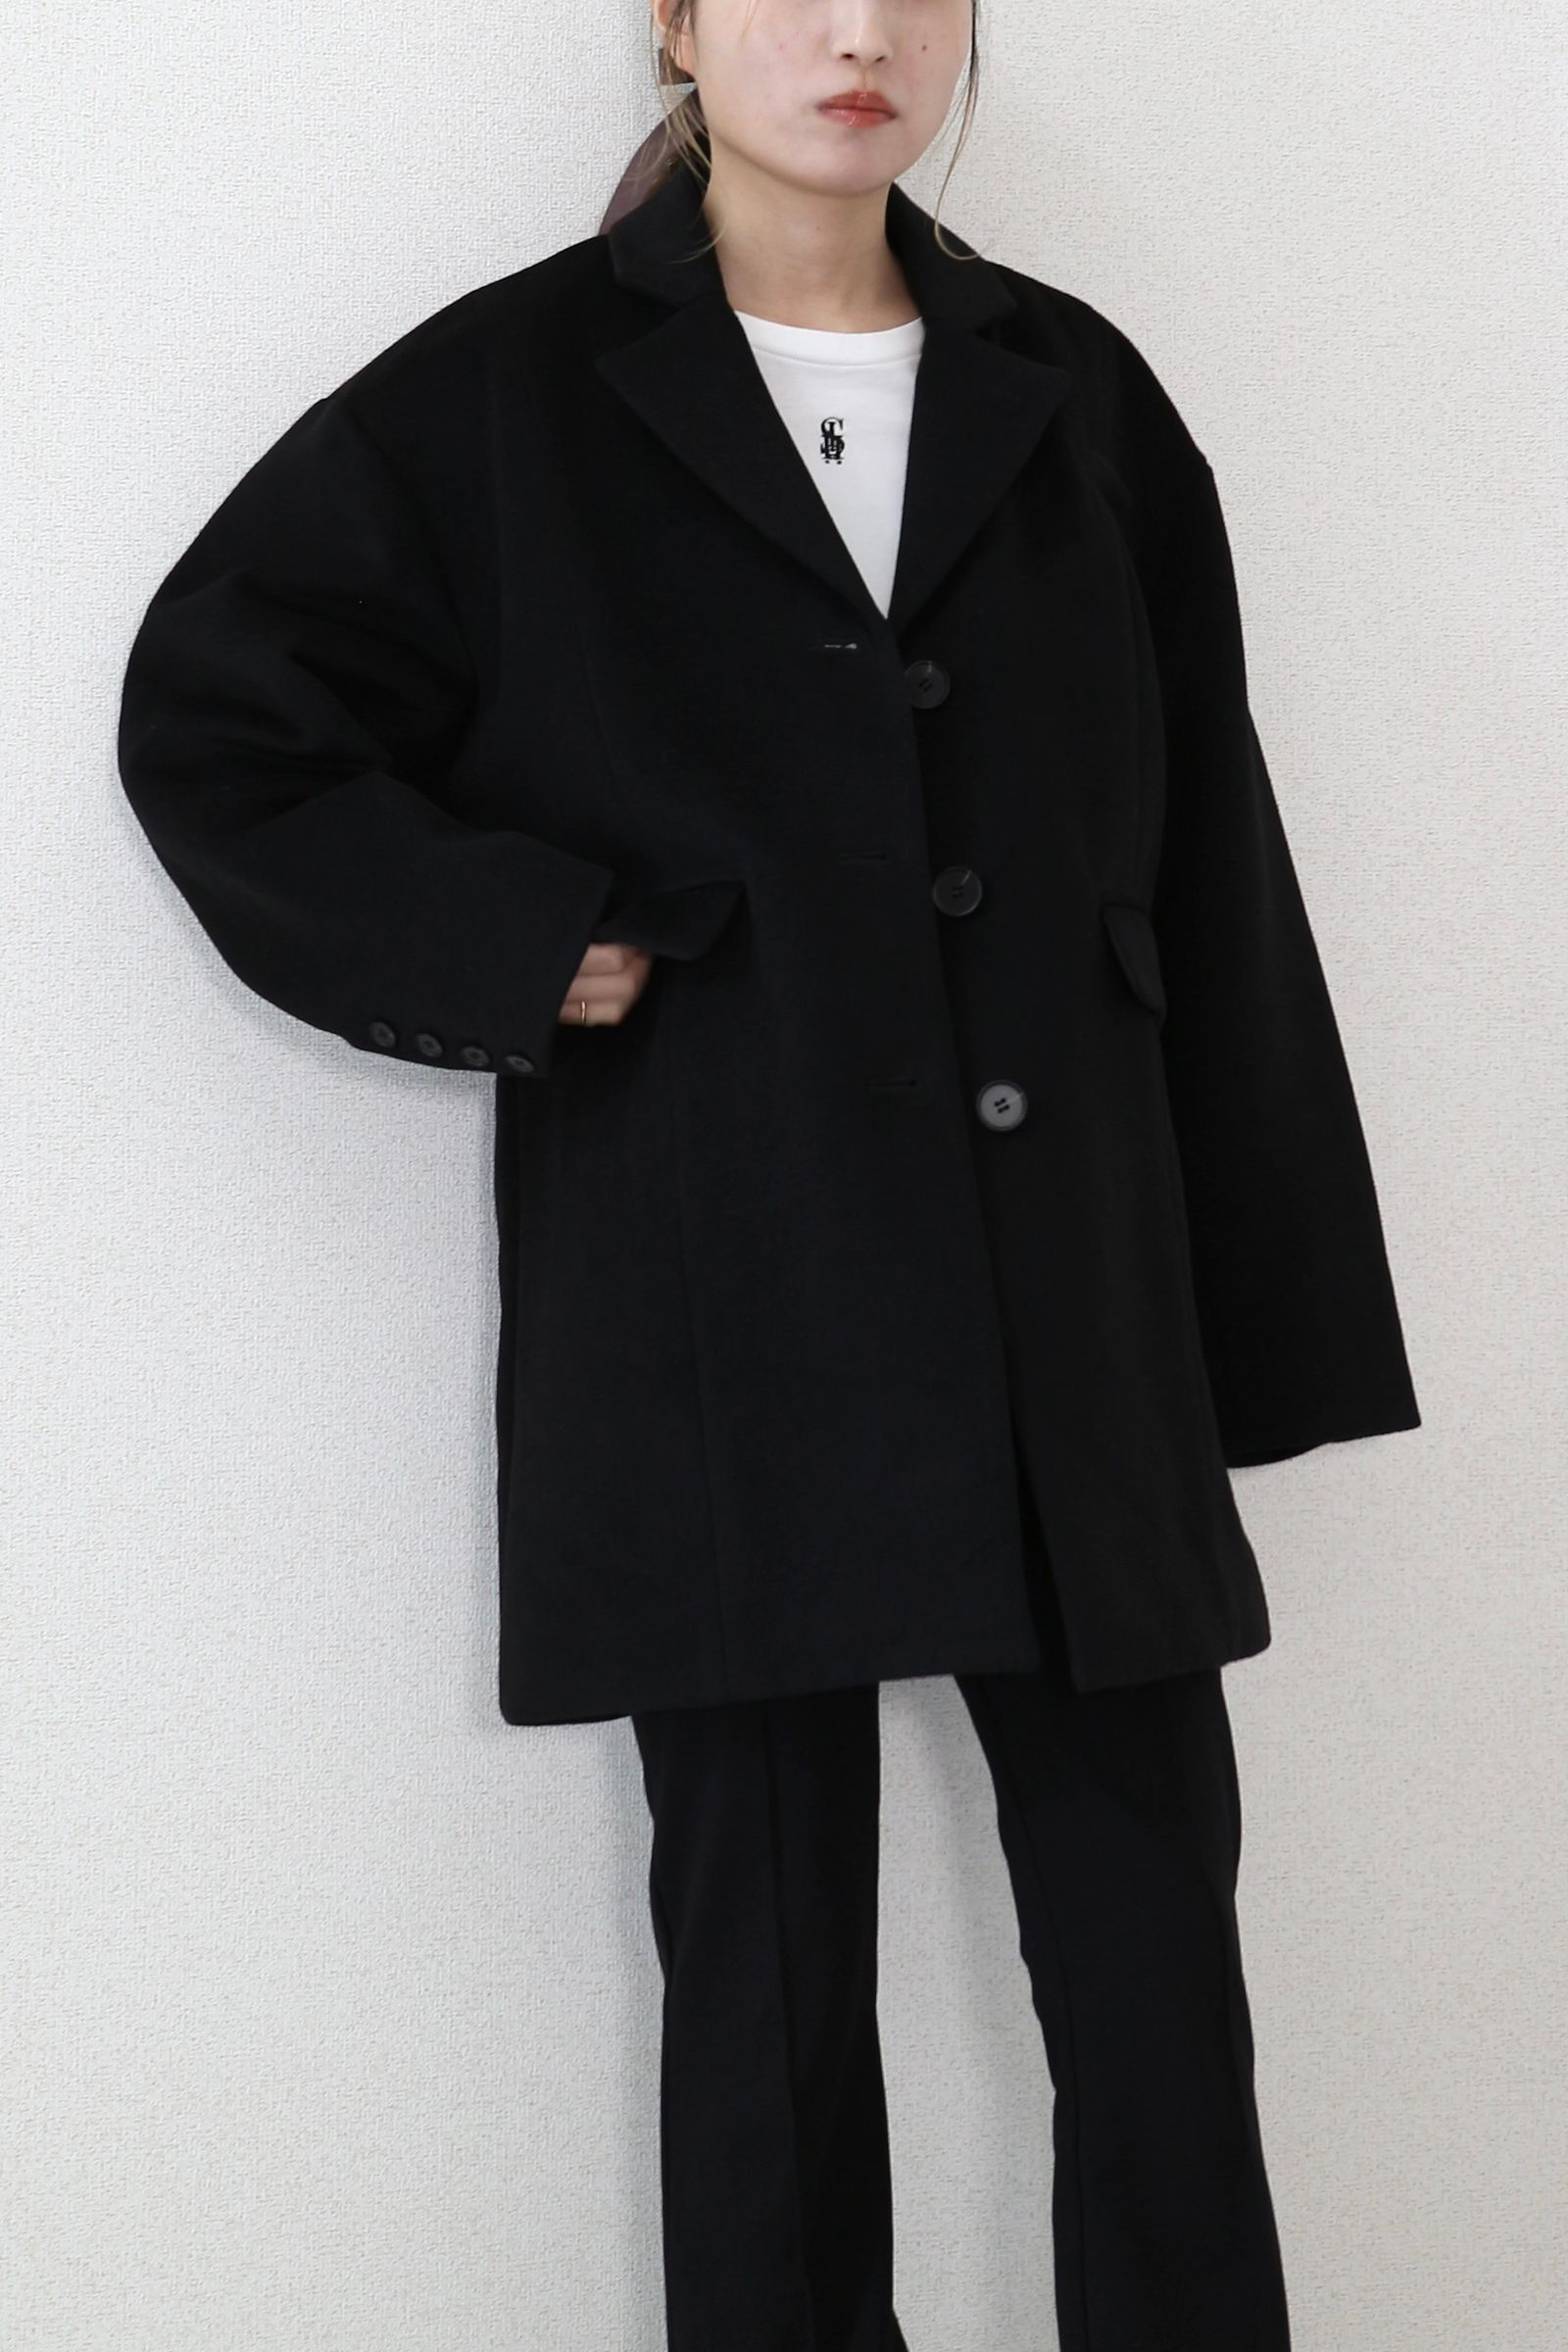 CAVEZA ROSSO - OVER SIZE TAILORED COLLAR JACKET / オーバー